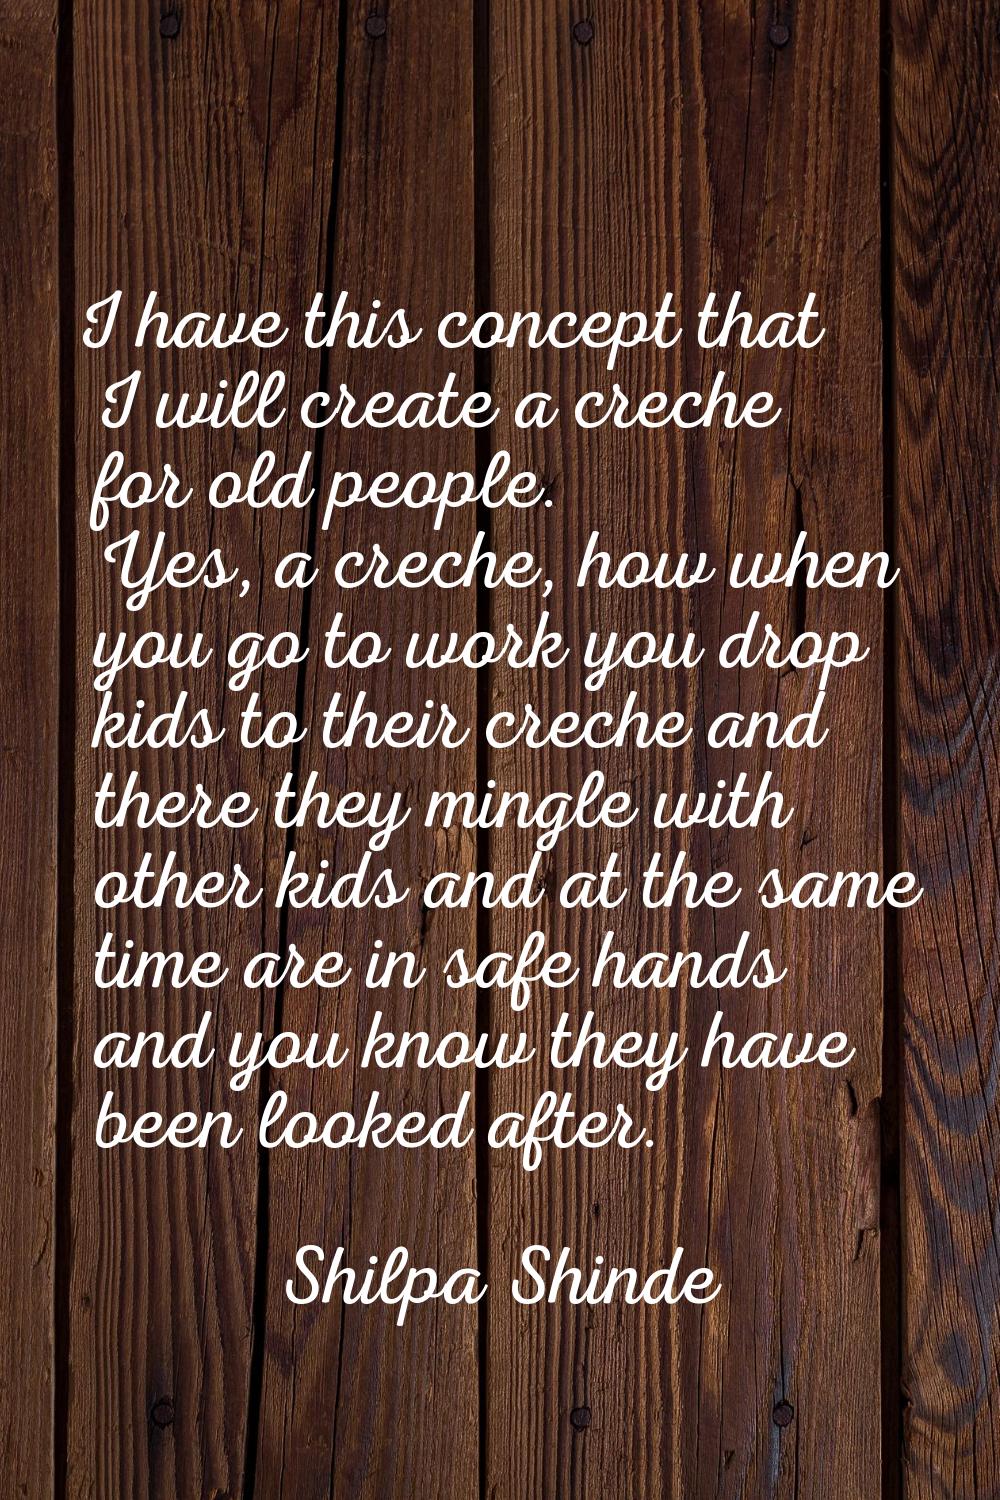 I have this concept that I will create a creche for old people. Yes, a creche, how when you go to w